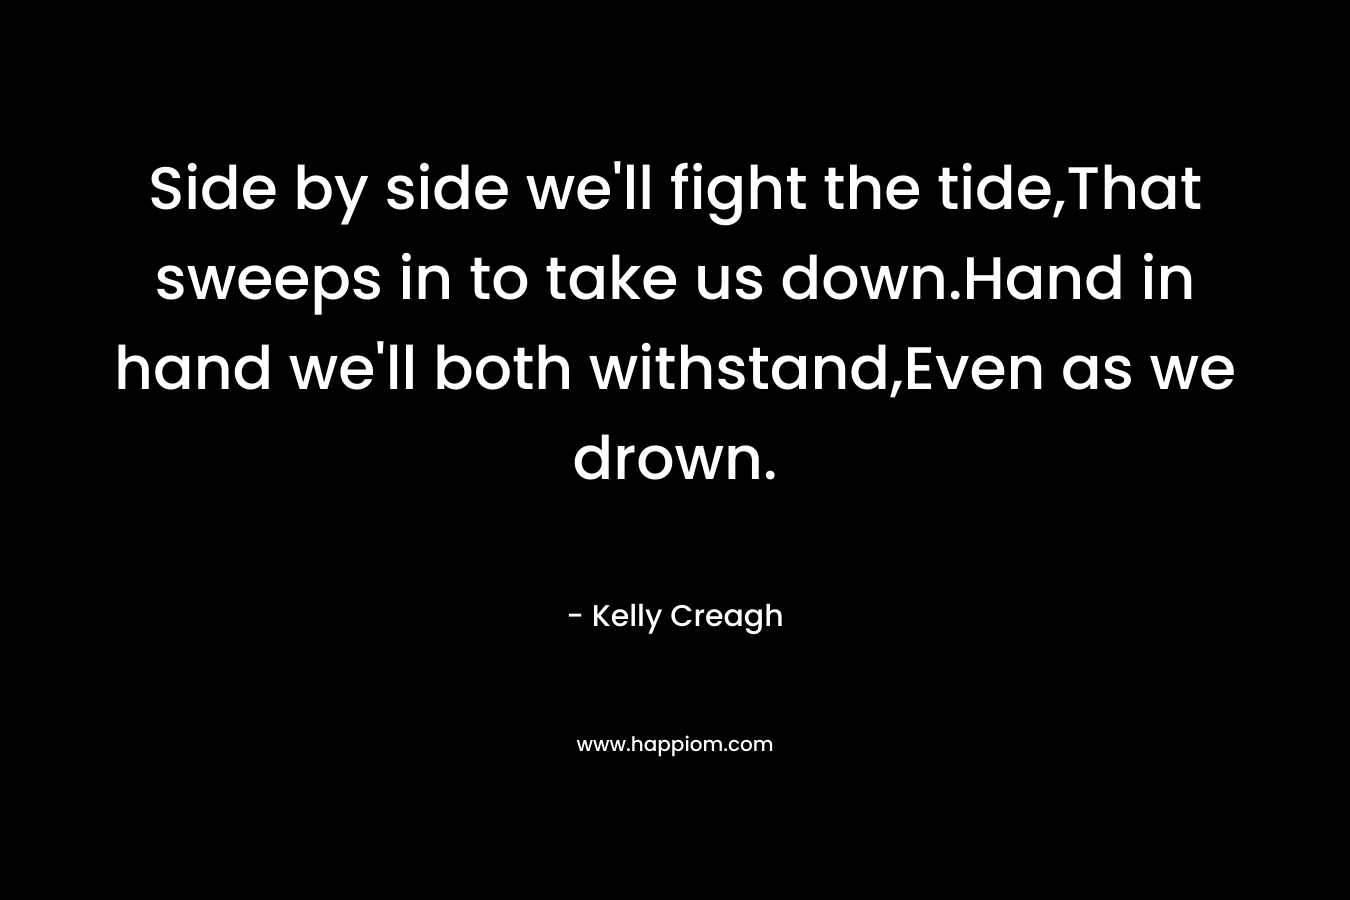 Side by side we’ll fight the tide,That sweeps in to take us down.Hand in hand we’ll both withstand,Even as we drown. – Kelly Creagh